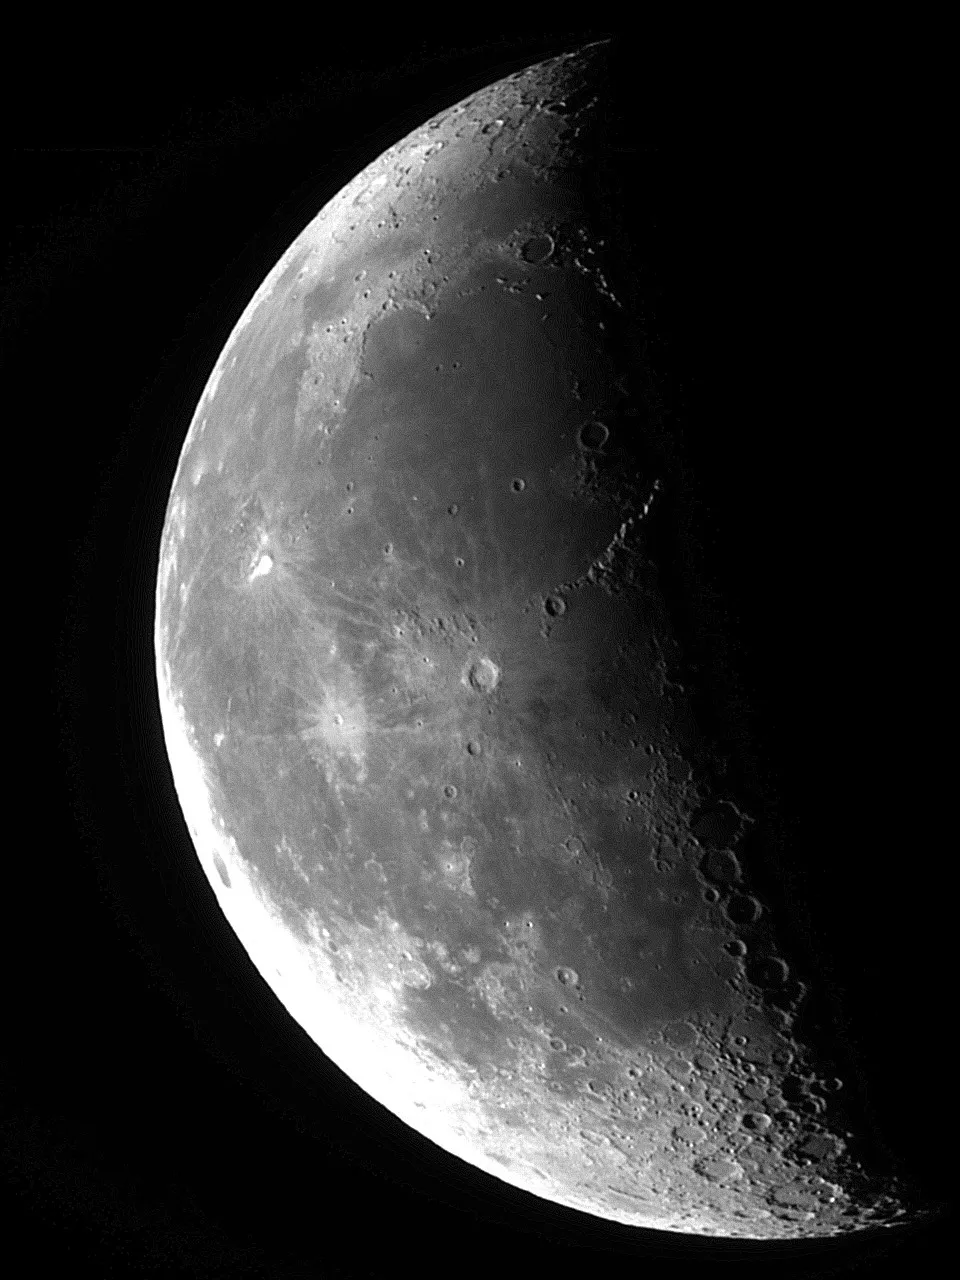 Last Quarter Moon is the time to start looking for Gruithuisen's Lunar City. Credit: Andrew McNaught, Gloucestershire, UK.